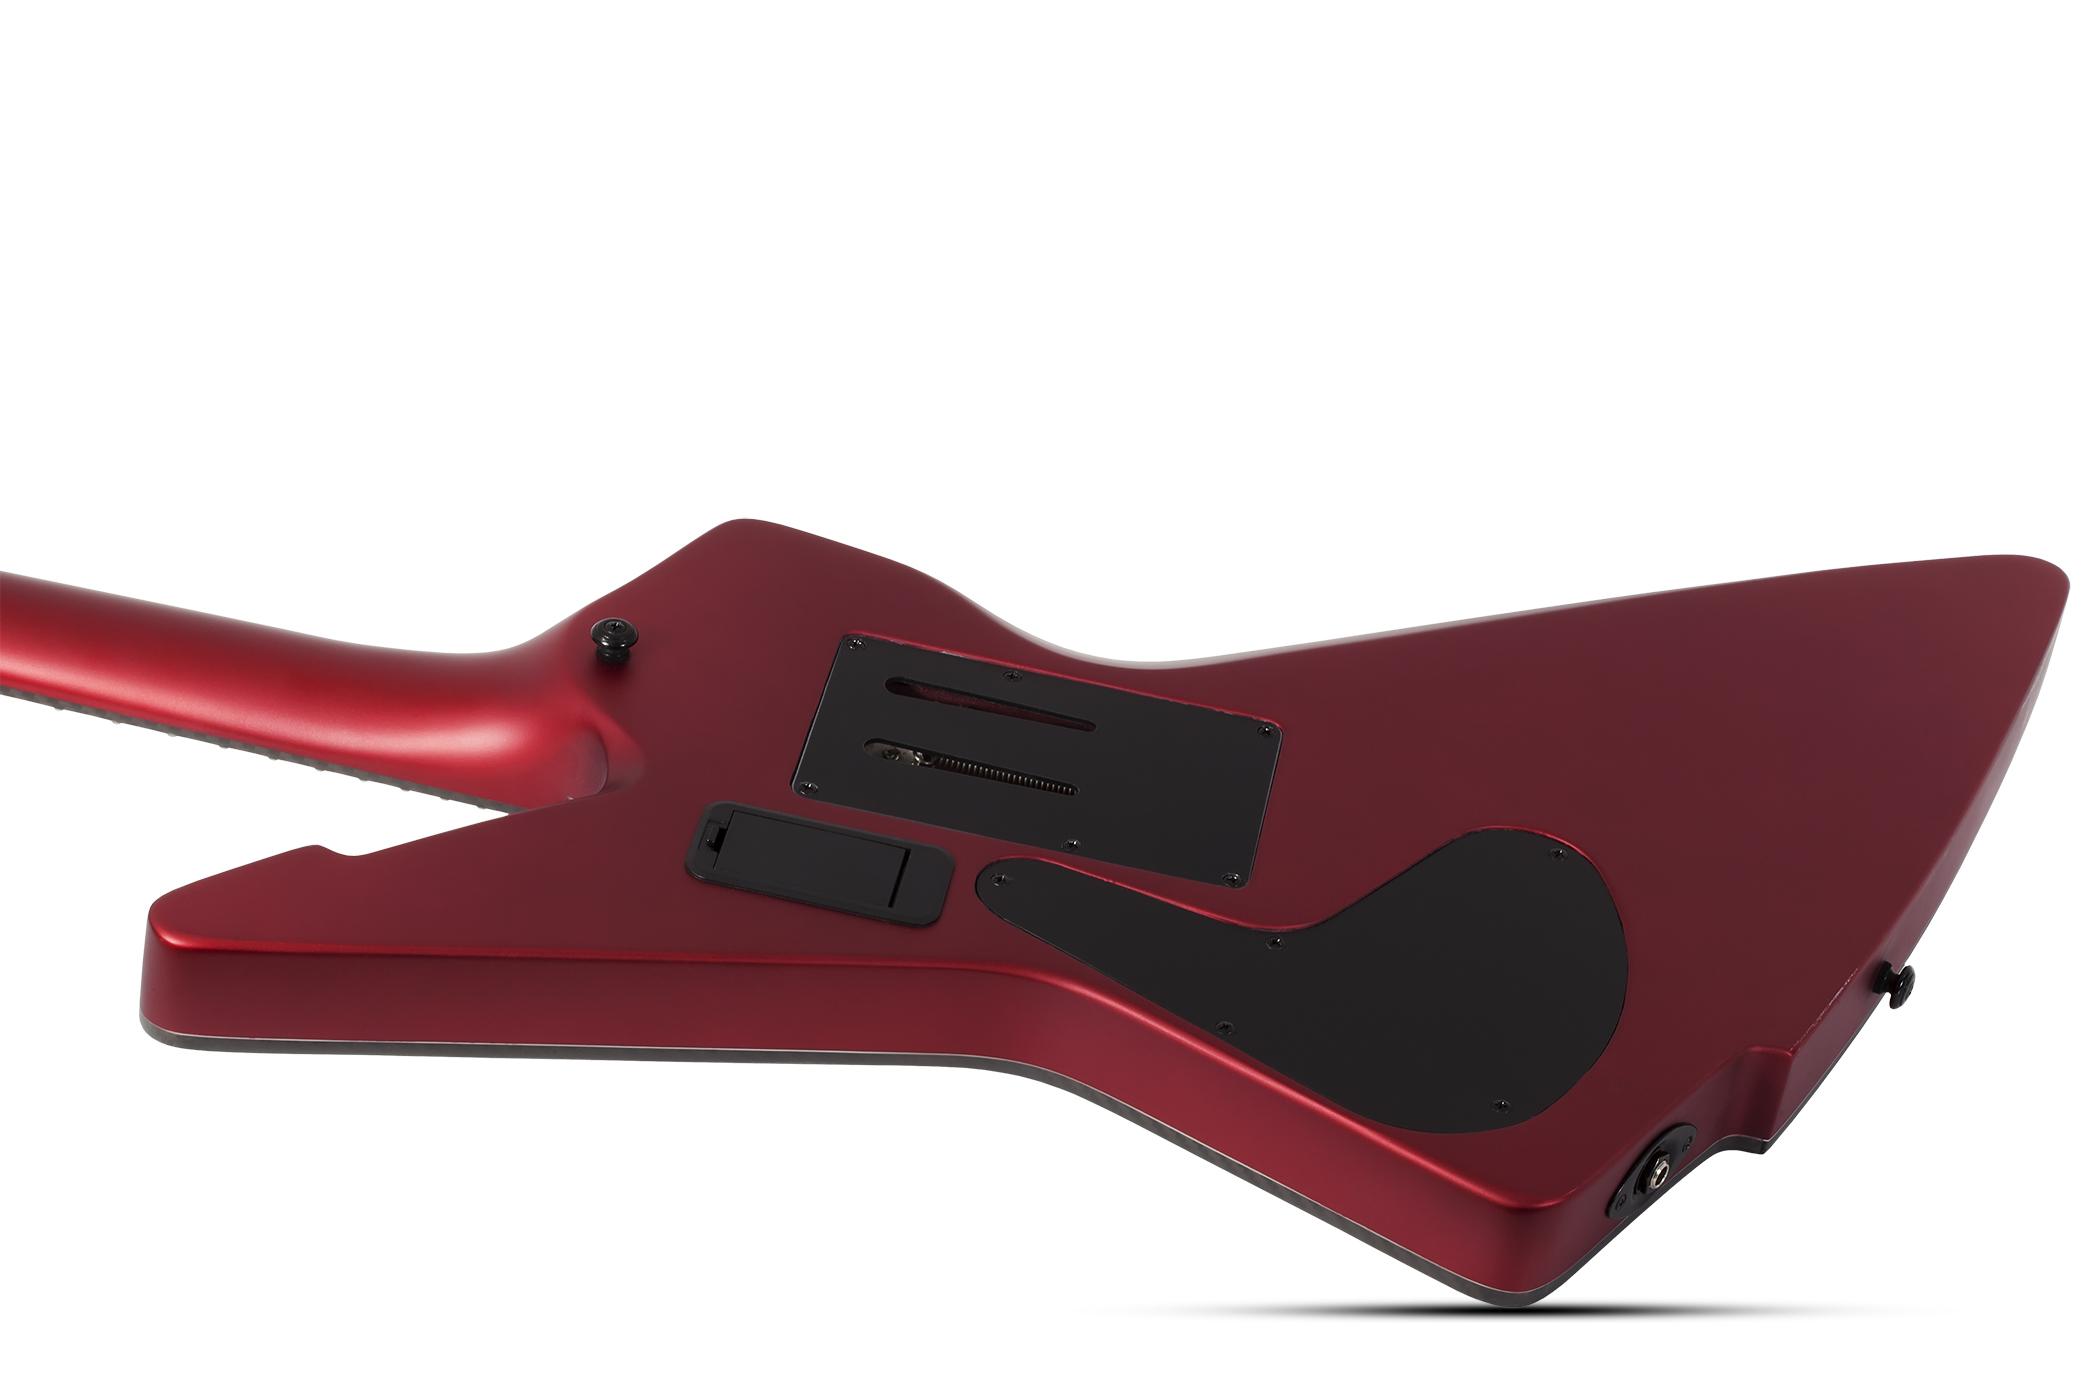 Schecter E-1 Fr S Special Edition 2h Sustainiac Fr Eb - Satin Candy Apple Red - E-Gitarre aus Metall - Variation 1